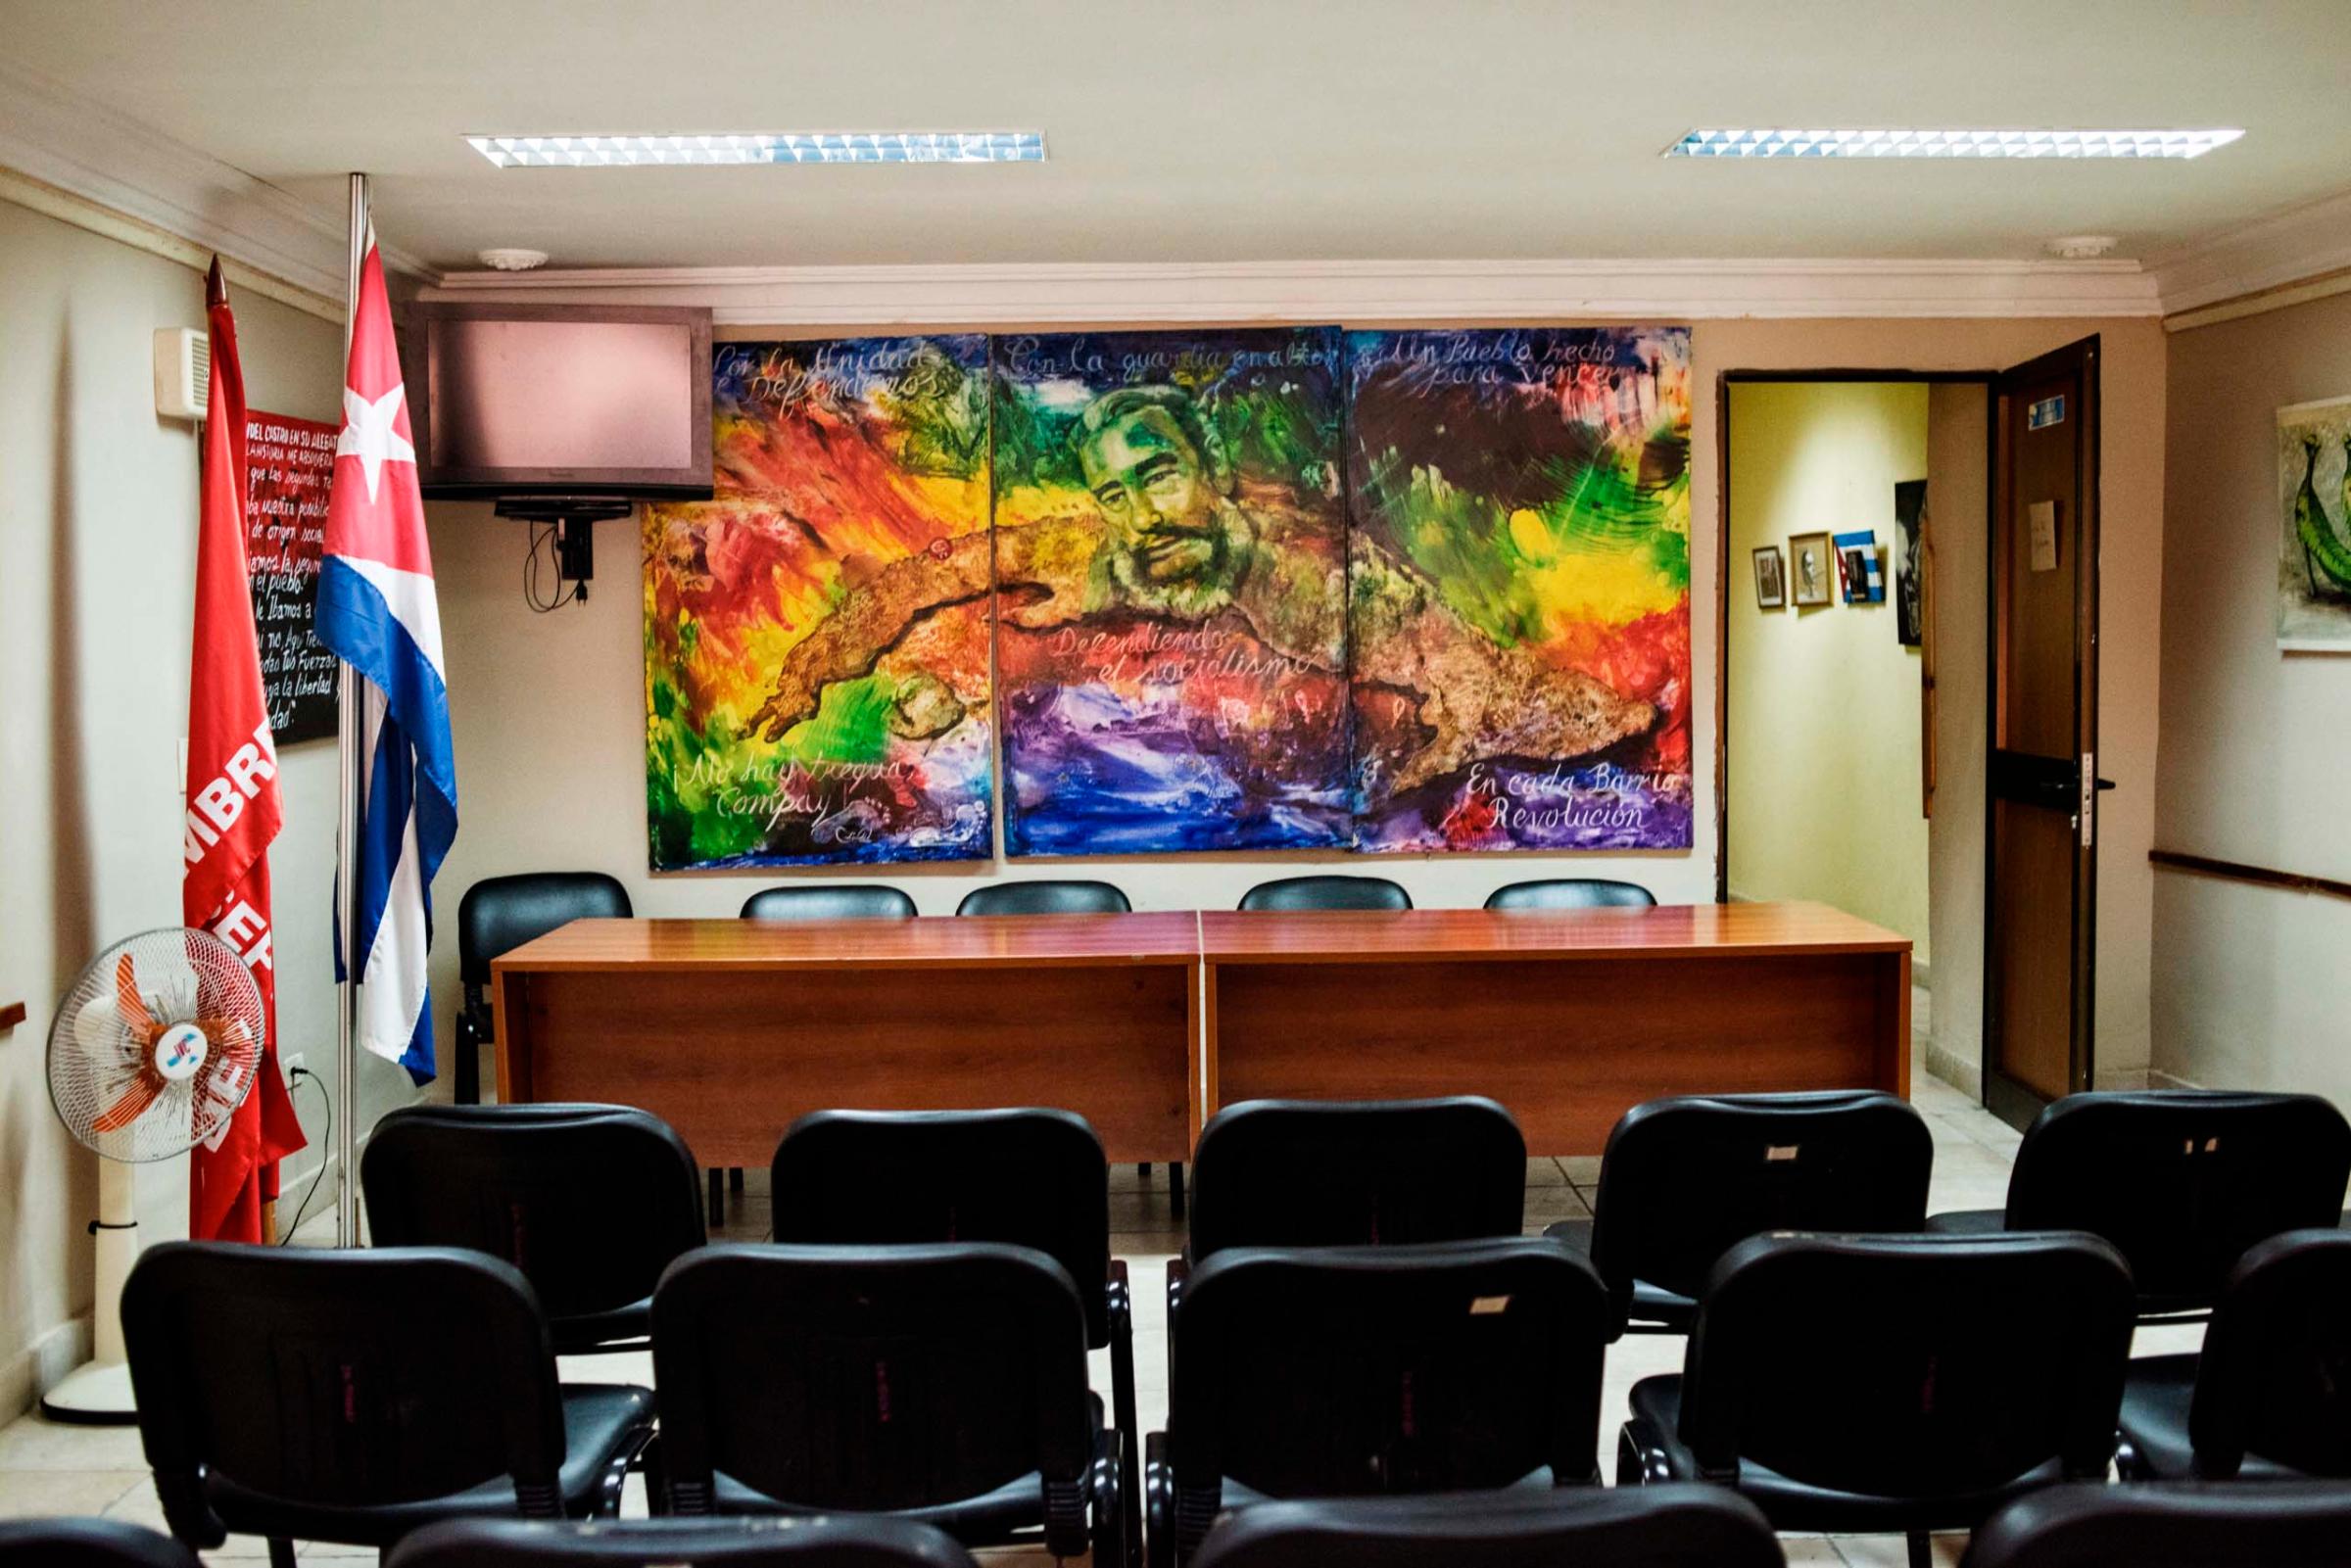 A theater and conference room inside the headquarters and museum for the "Committees for the Defense of the Revolution" (CDR), which was established in 1960 as "the eyes and ears of the Revolution." In all parts of the country, neighborhood watch groups act as a network of information for the police, Dec. 2014.Yuri Kozyrev—NOOR for TIME